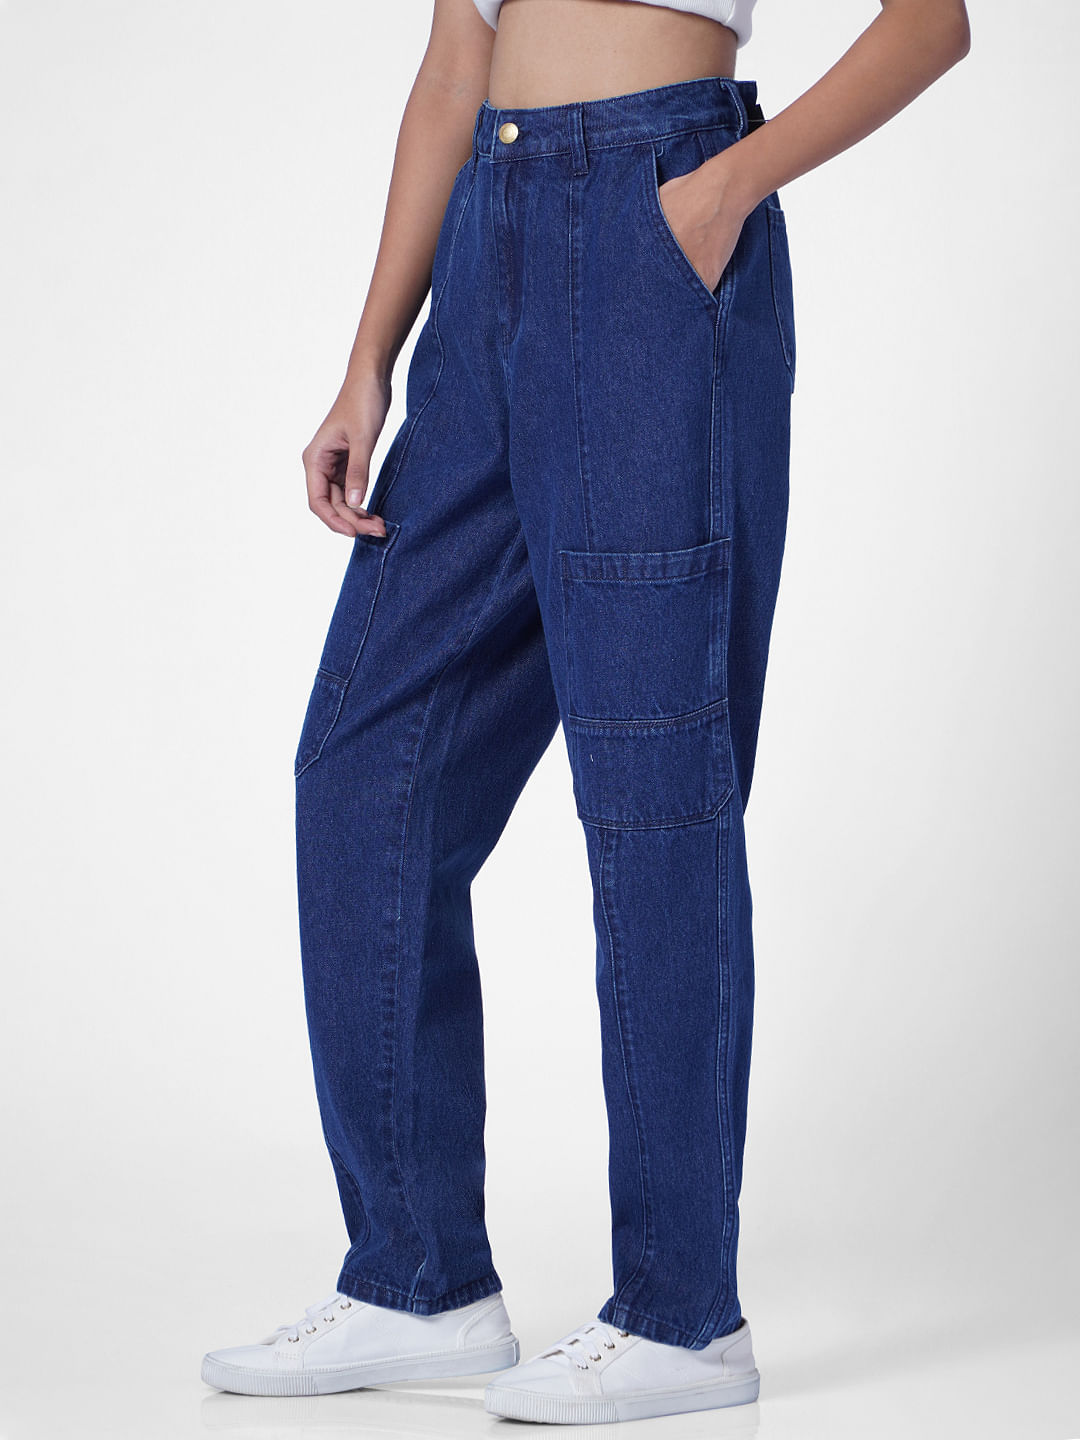 Buy Navy Blue Trousers & Pants for Women by Outryt Online | Ajio.com